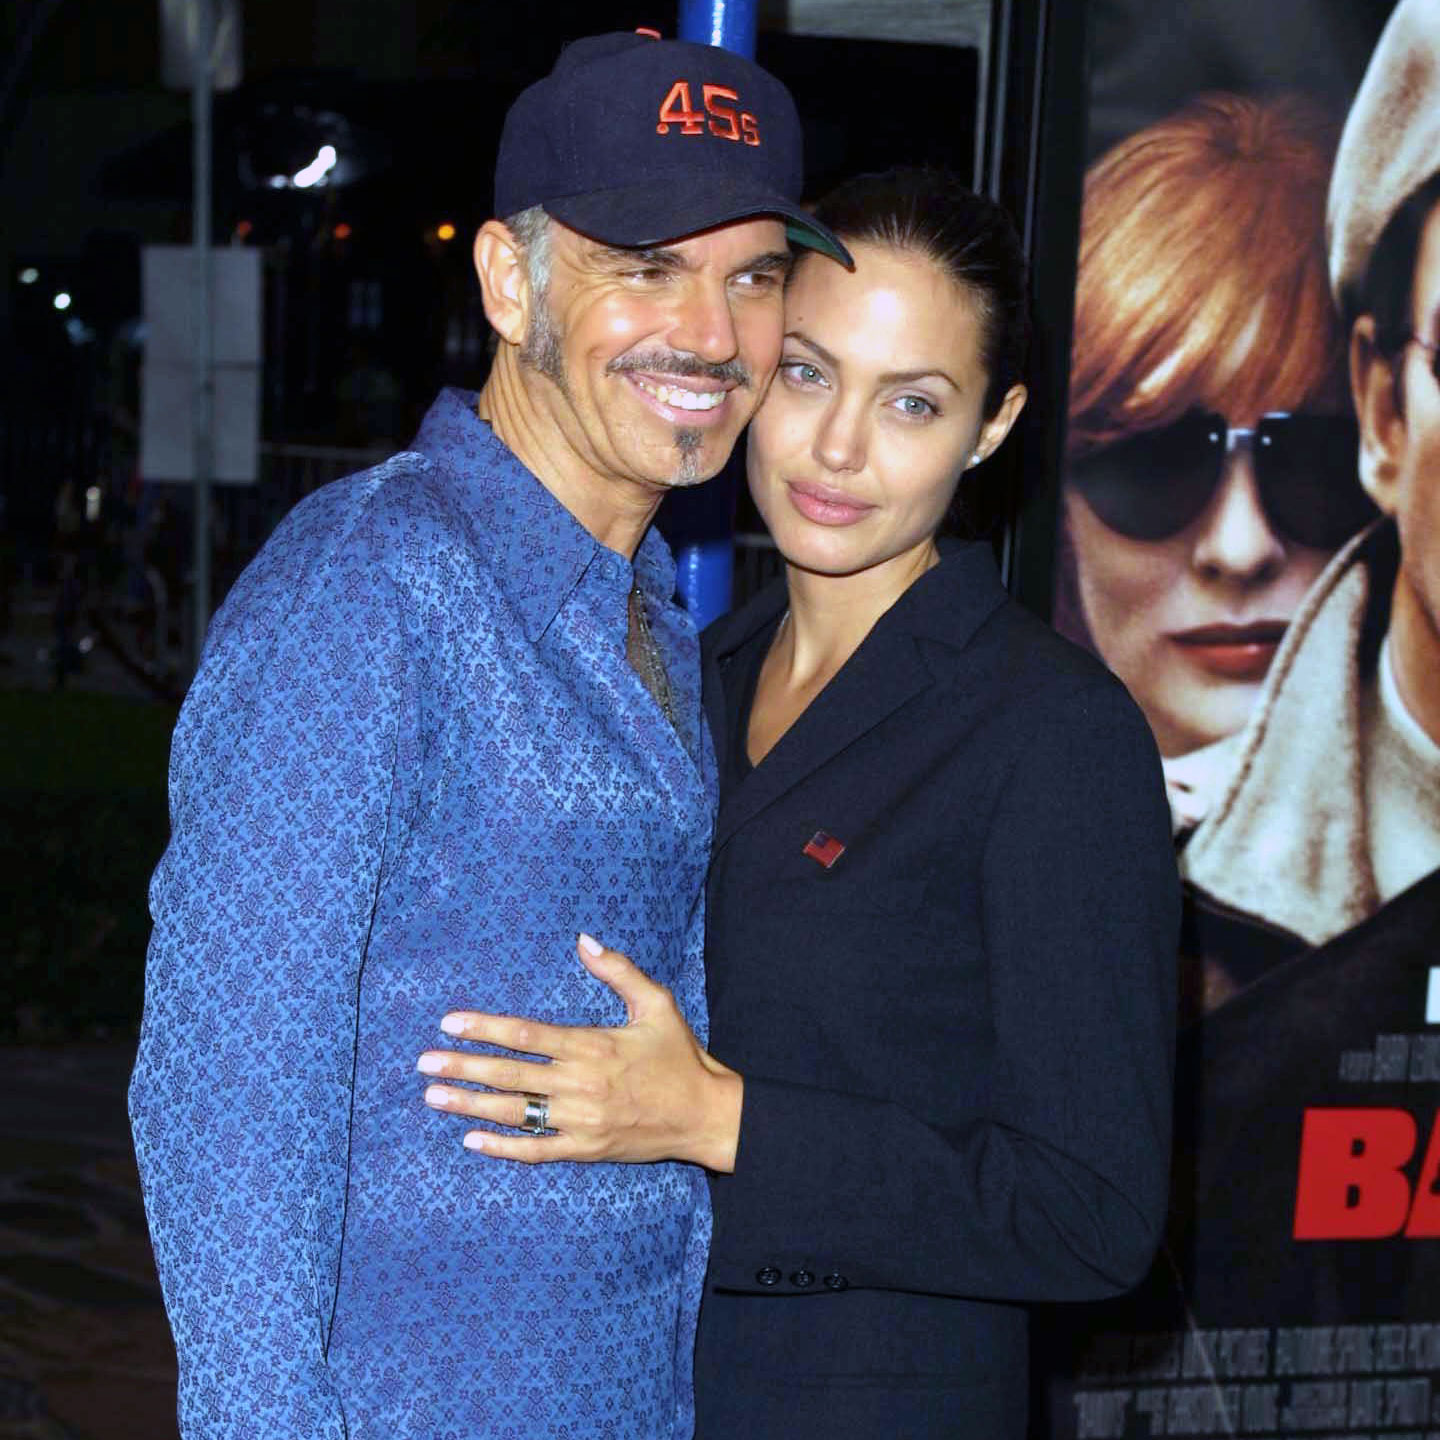 "We are Good Friends": Billy Bob Thornton says he and Angelina Jolie Still 'Keep Up With Each Other' Nearly 20 Years After Their Split. 12